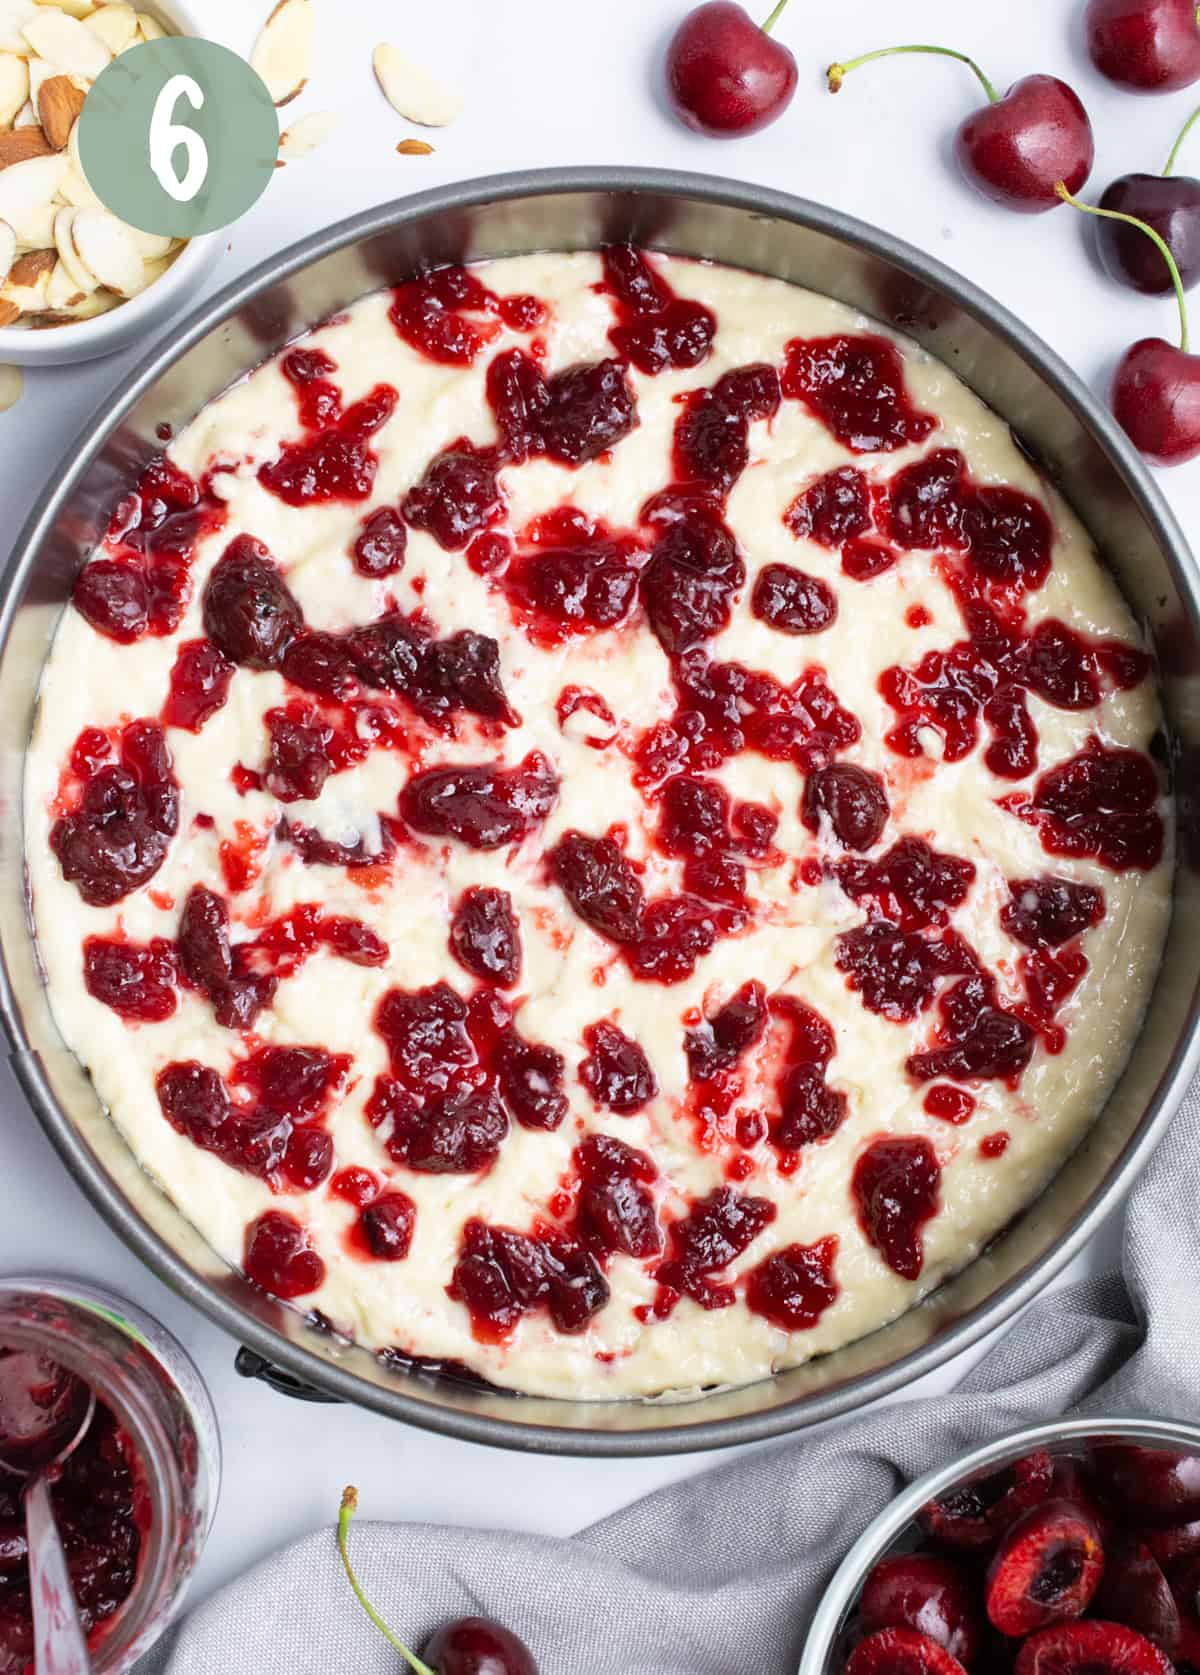 A second layer of cherry preserves dolloped onto batter in a spring from pan.